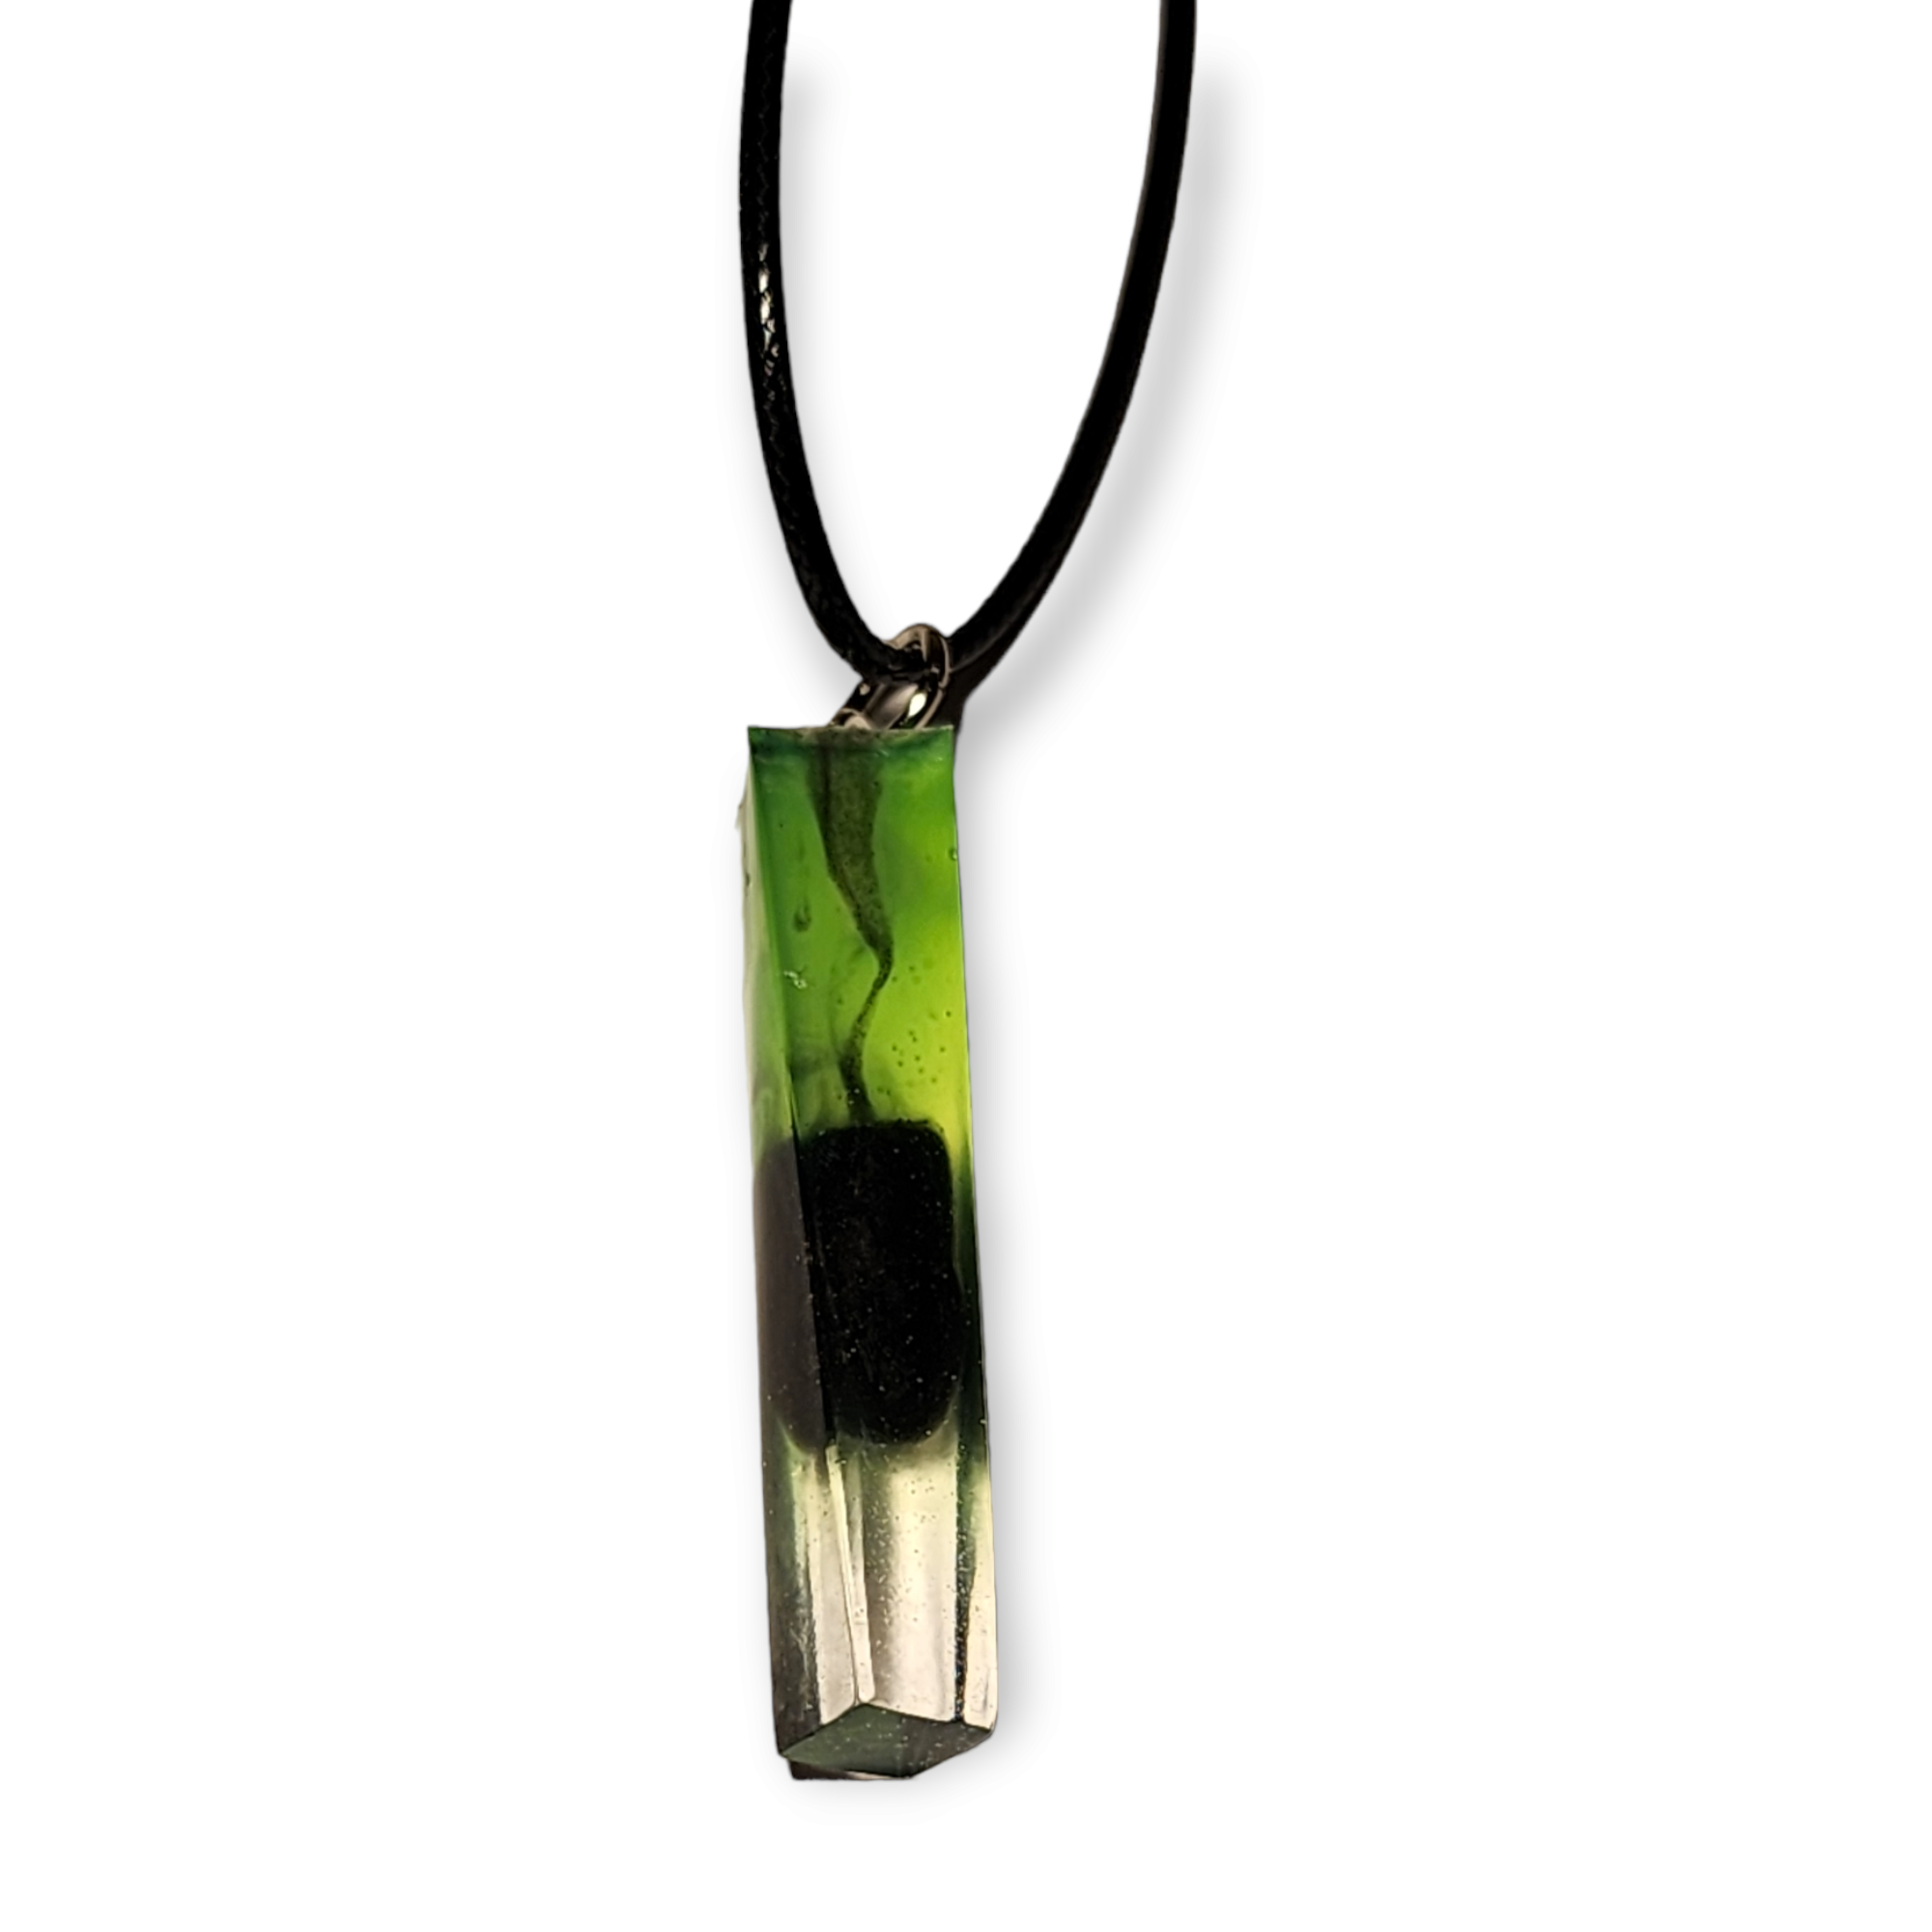 Limited Edition neon green and black necklace